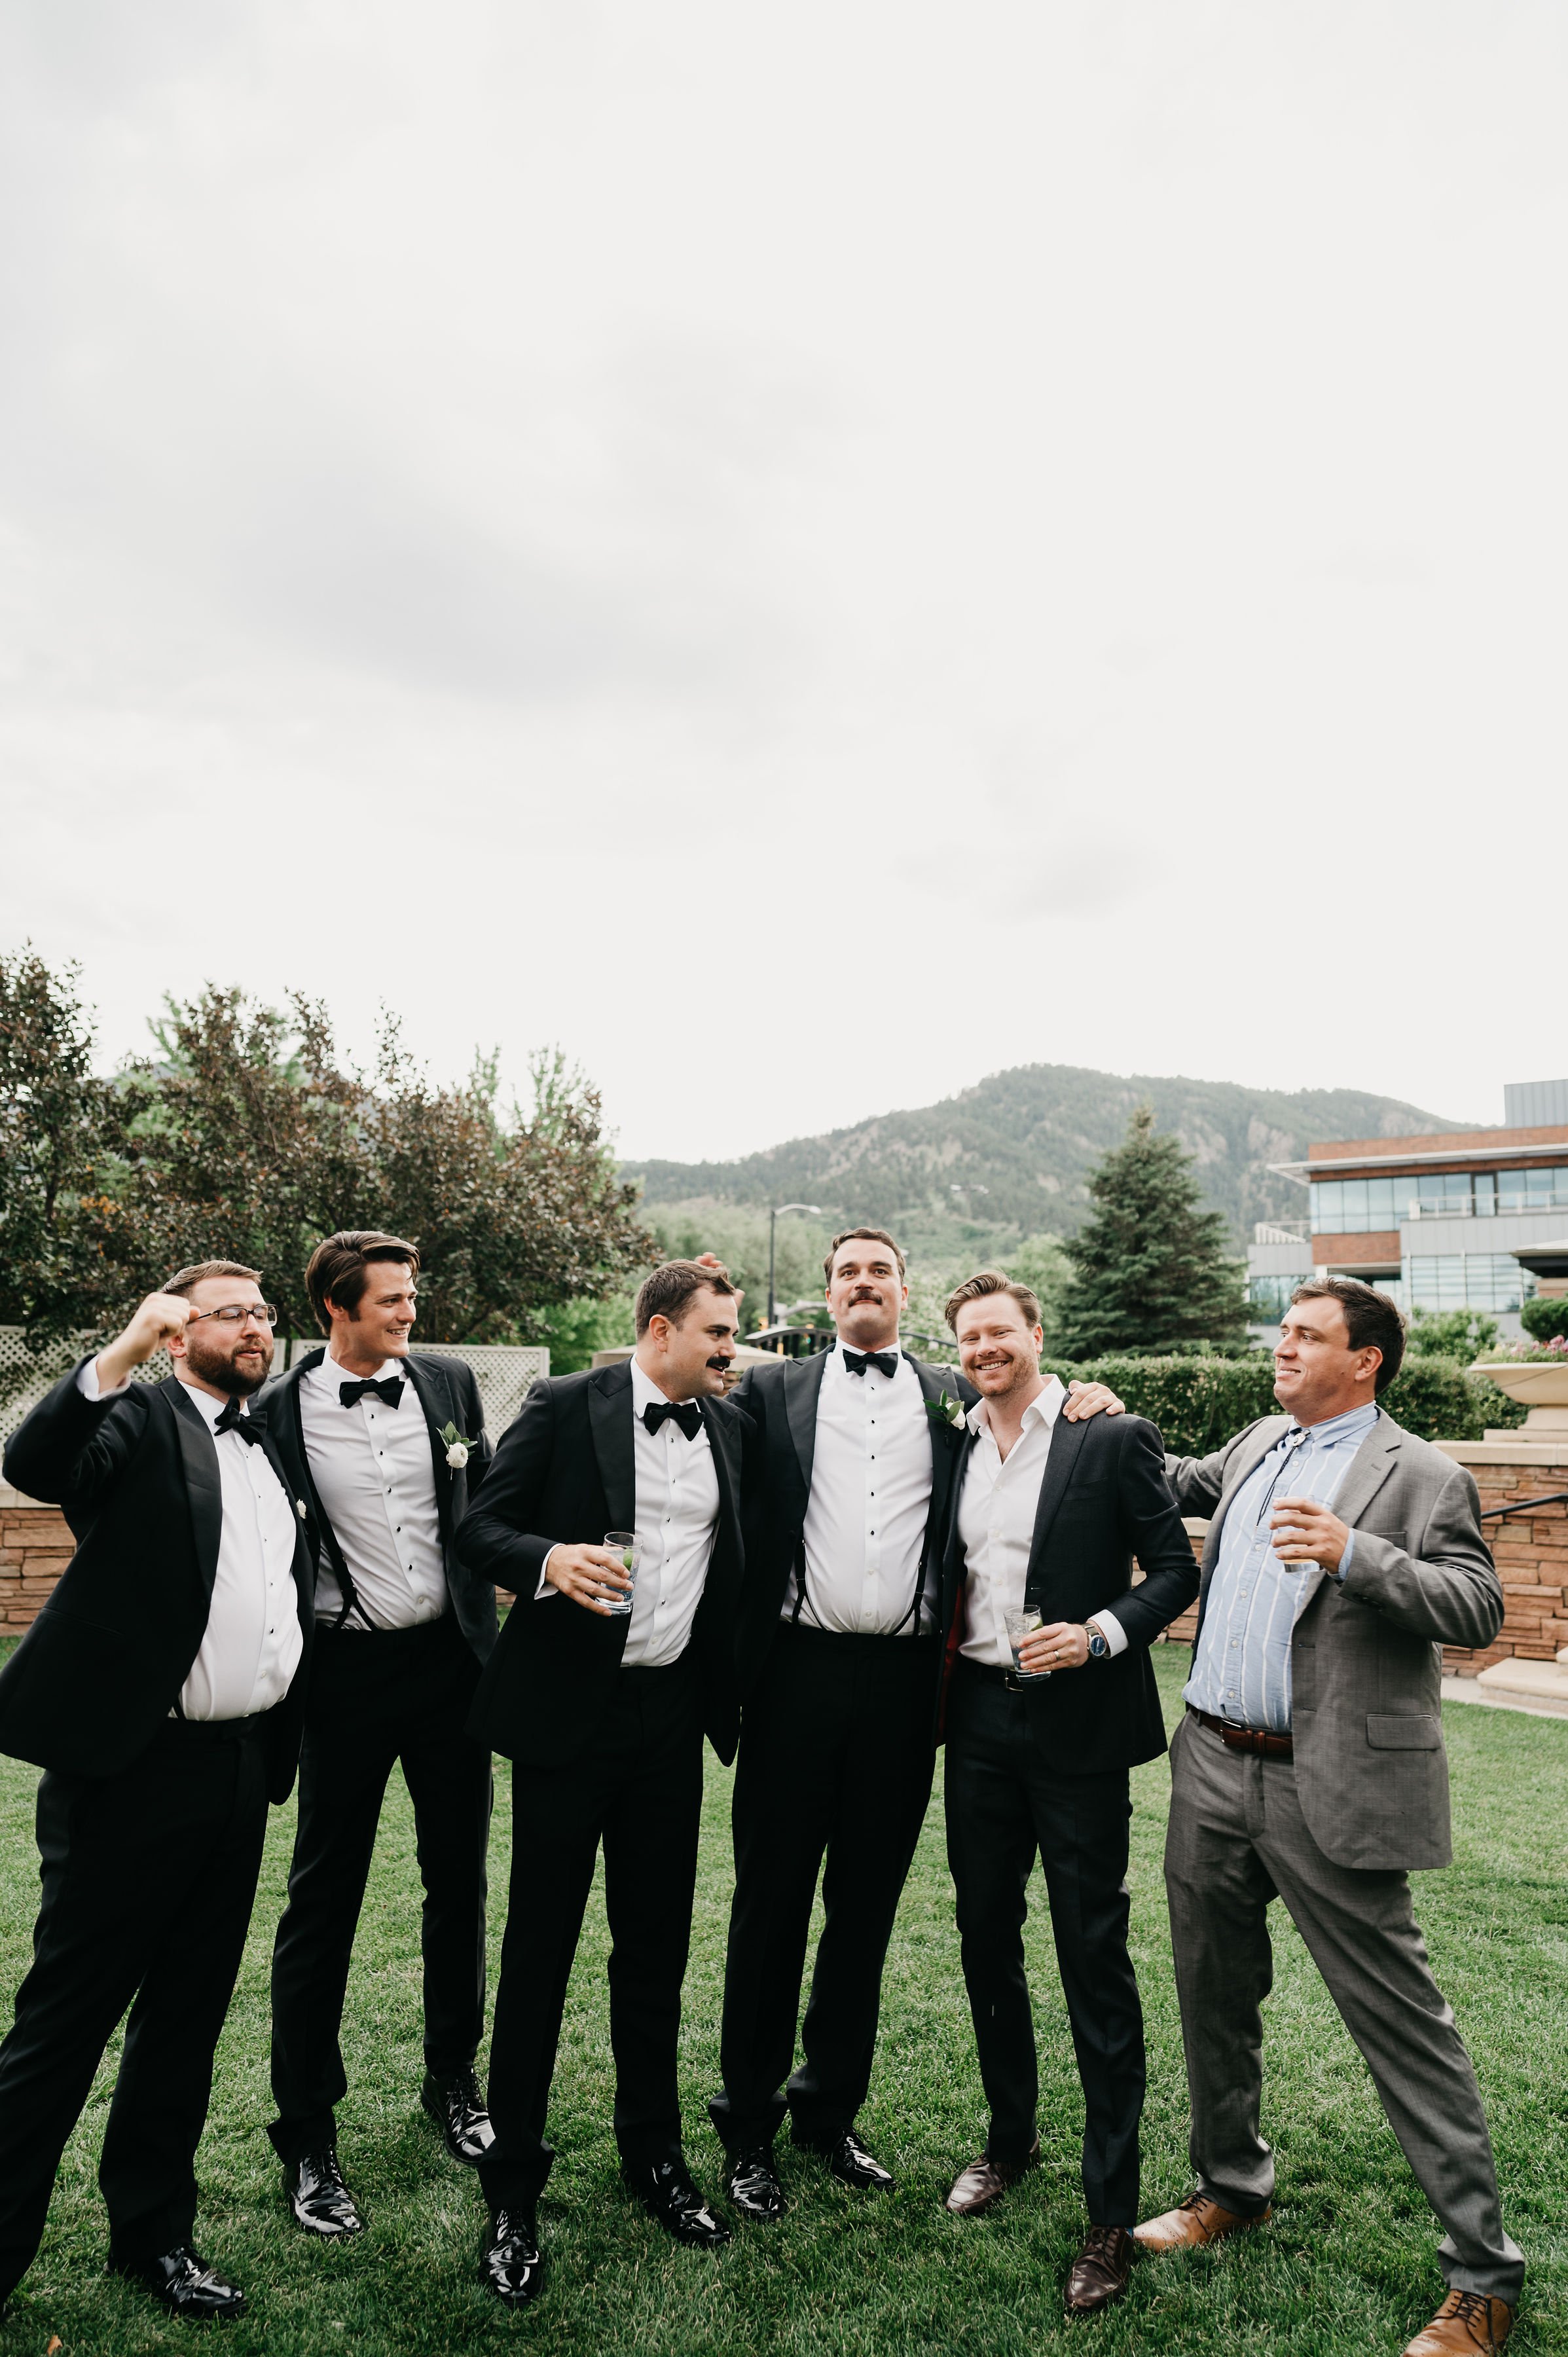 classic suits for the best men in this outdoor mountaintop wedding